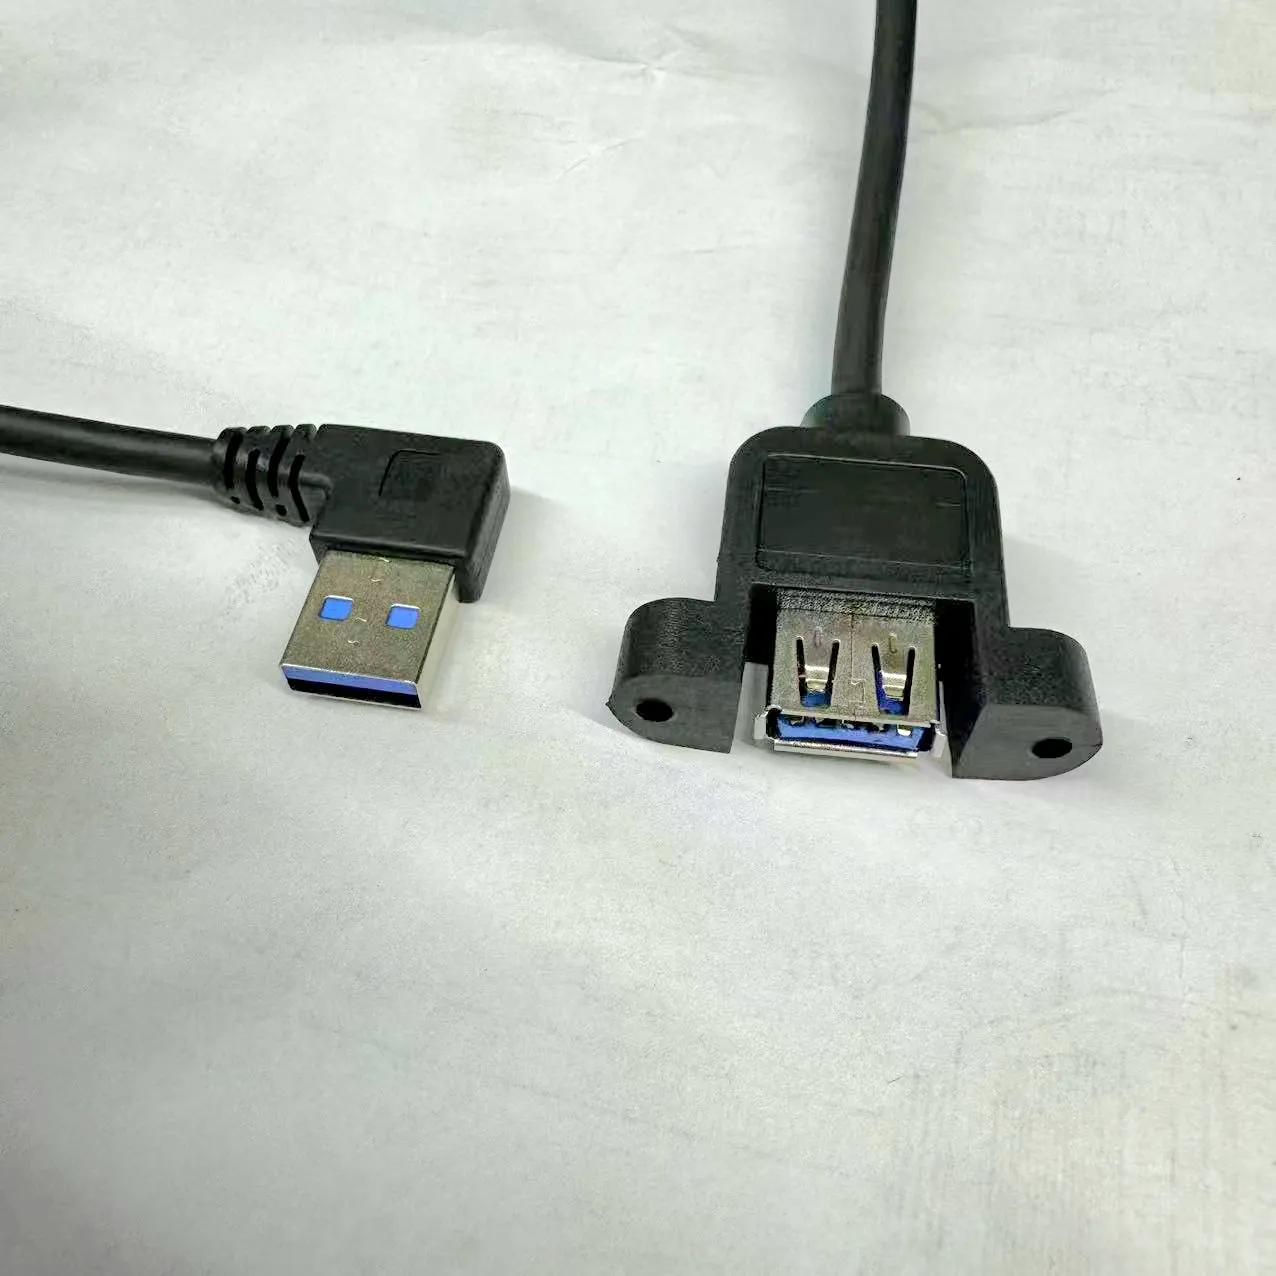 Usb 3.1 Standard Usb Cable 3 Angle Male to Panel Female for Charging and Computer